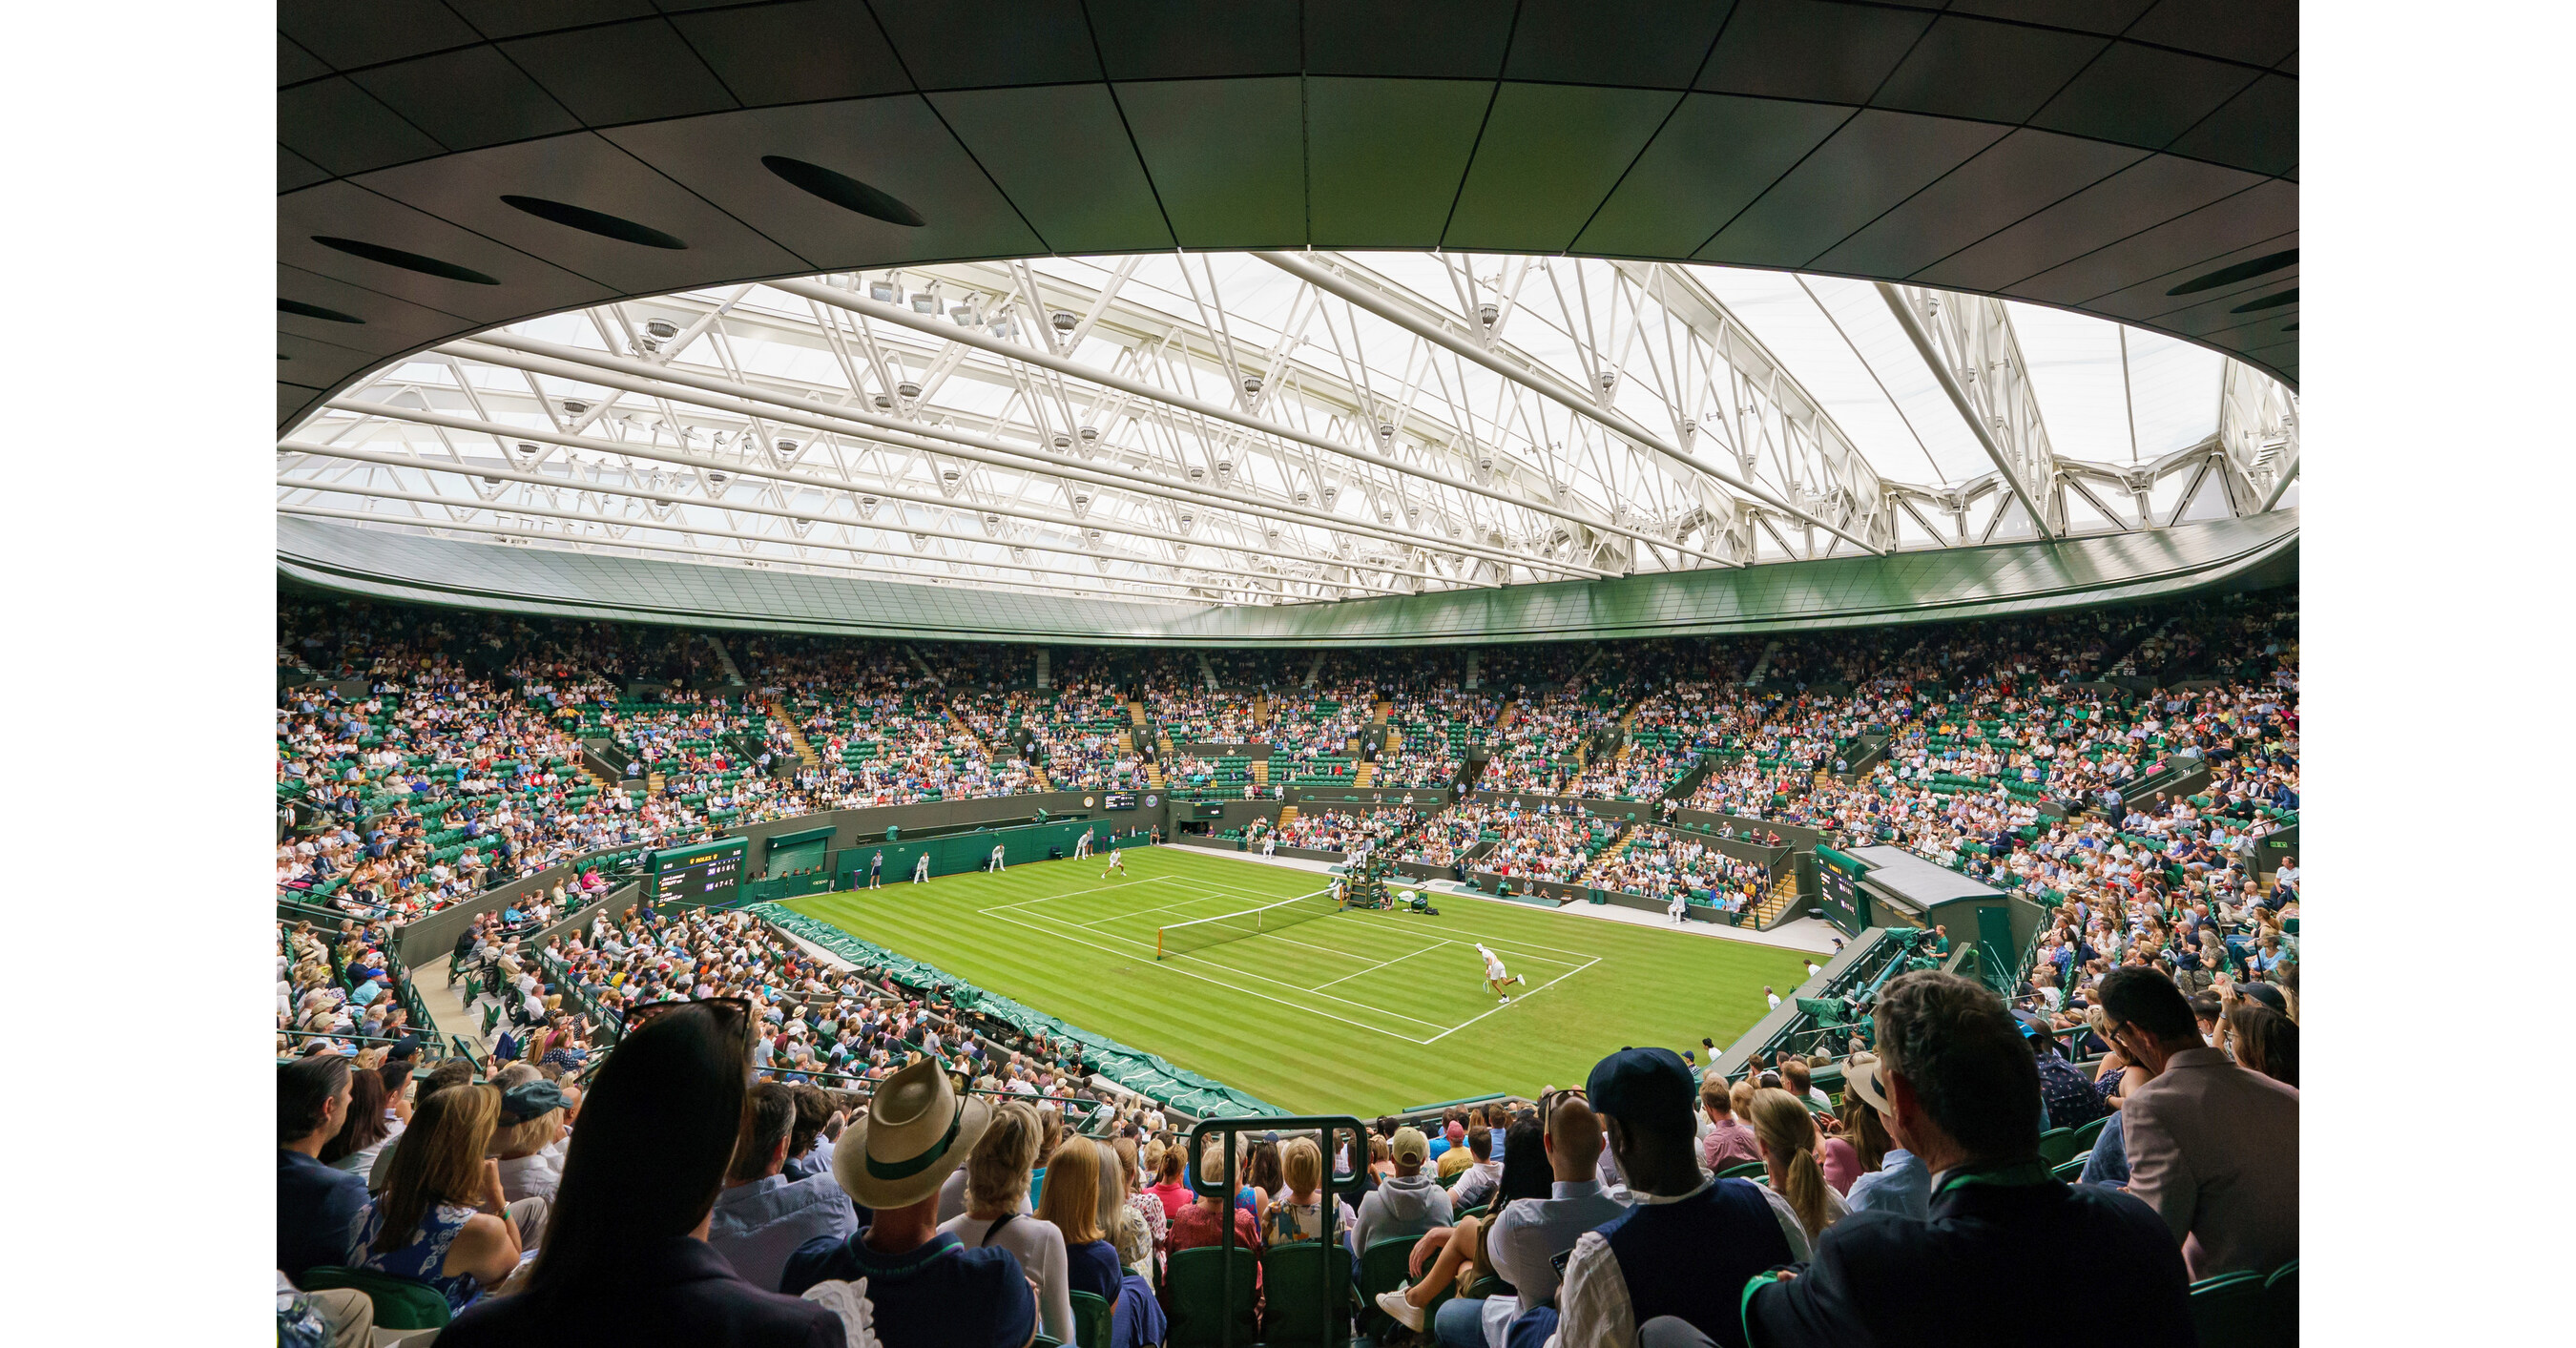 IBM and The All England Lawn Tennis Club launch new generative AI feature for personalized player stories at Wimbledon